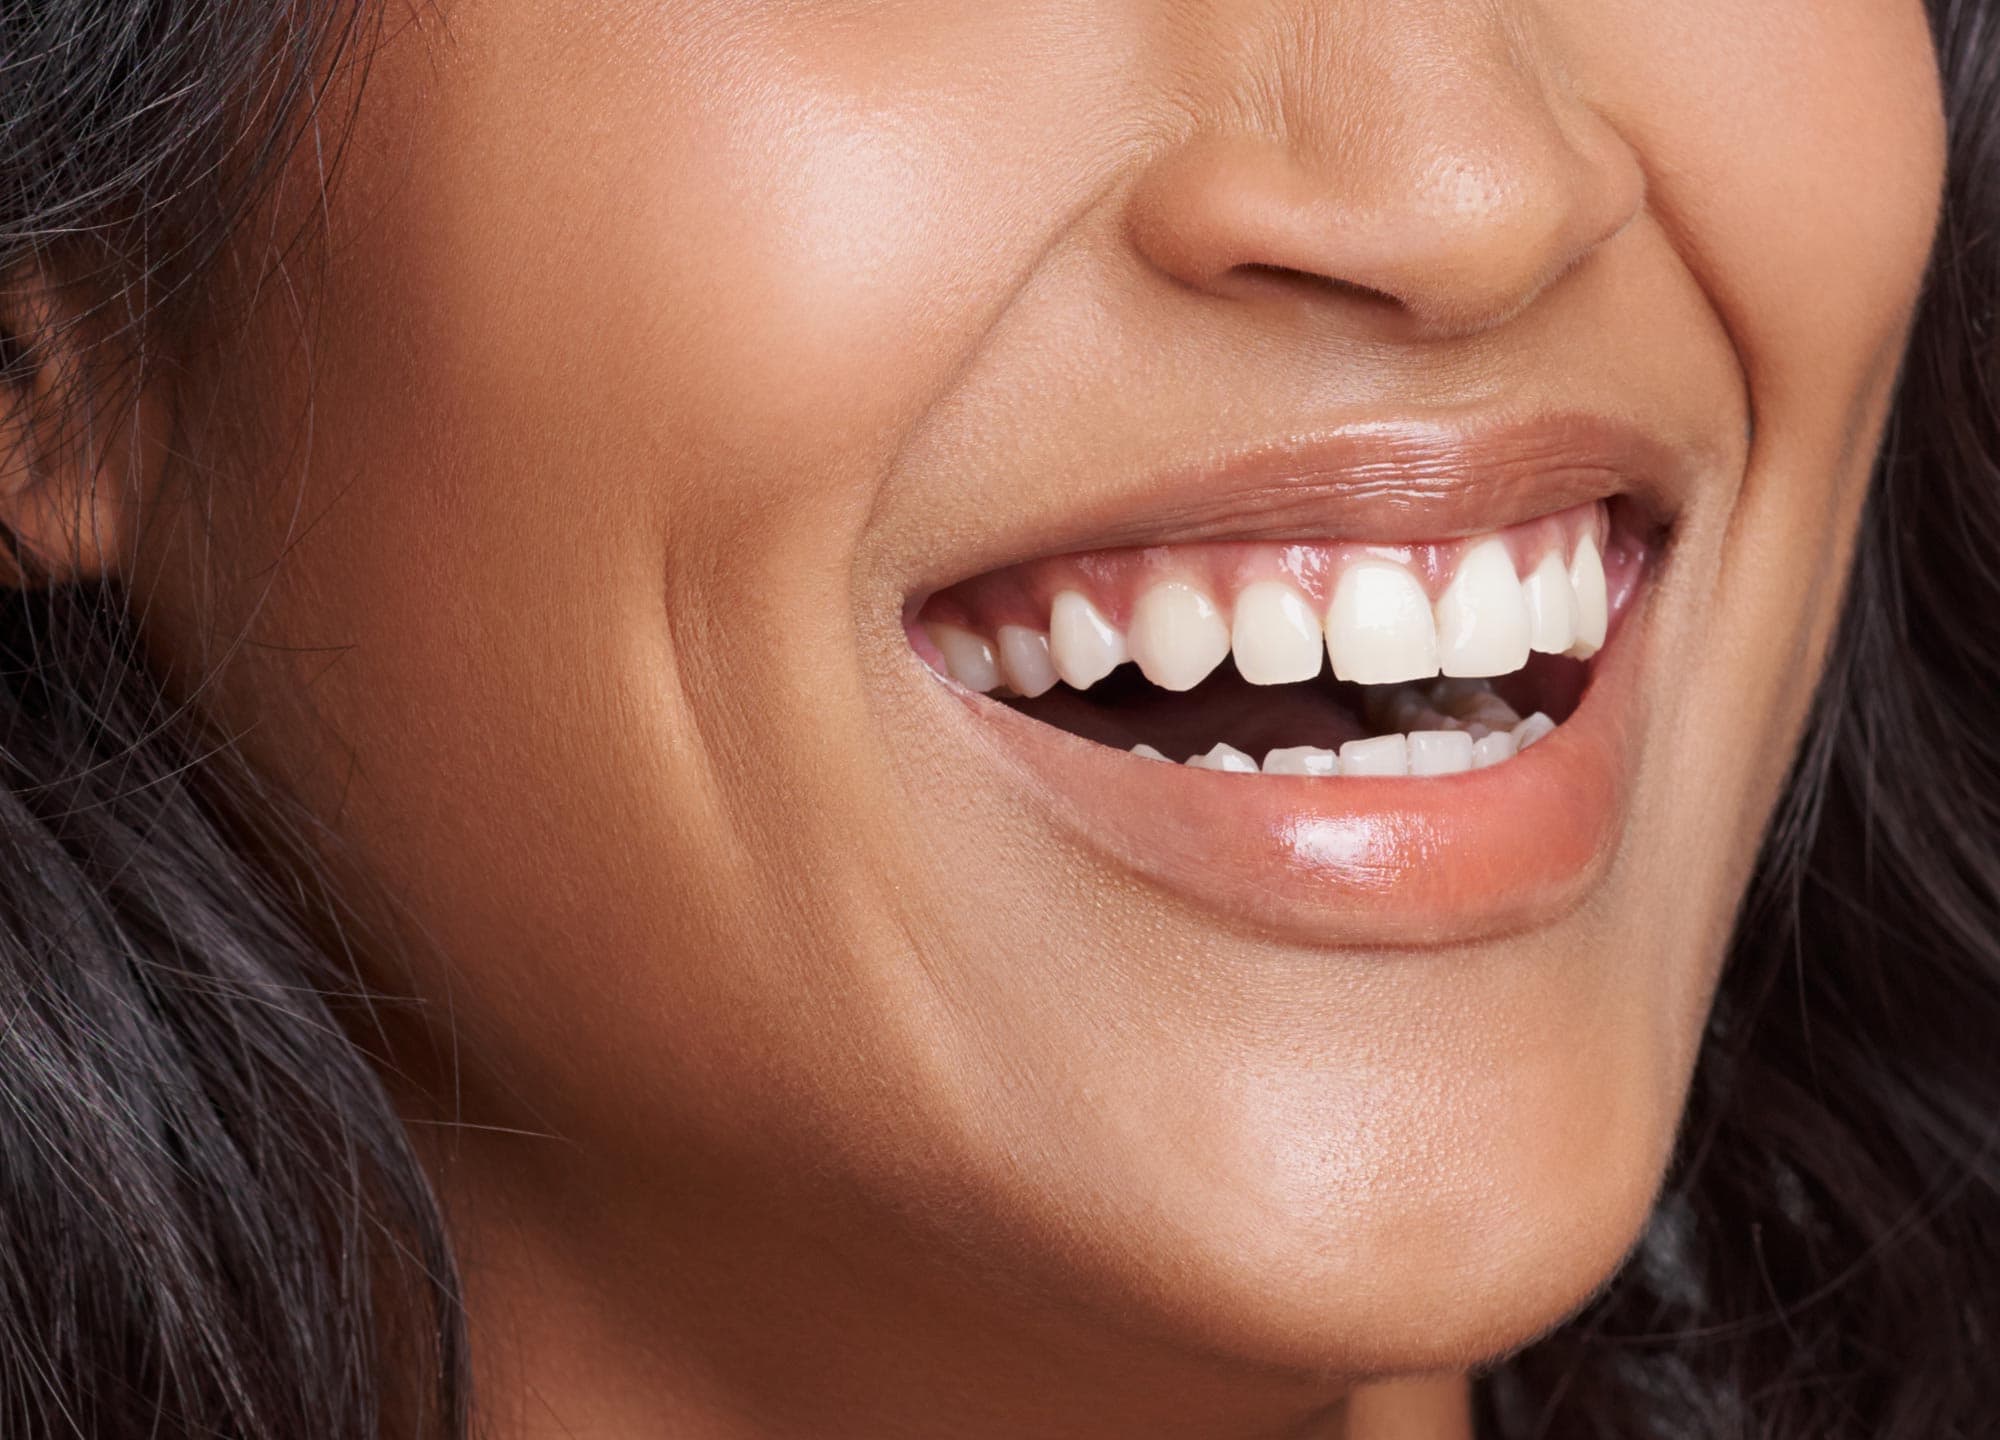 Can you kiss someone with invisalign?